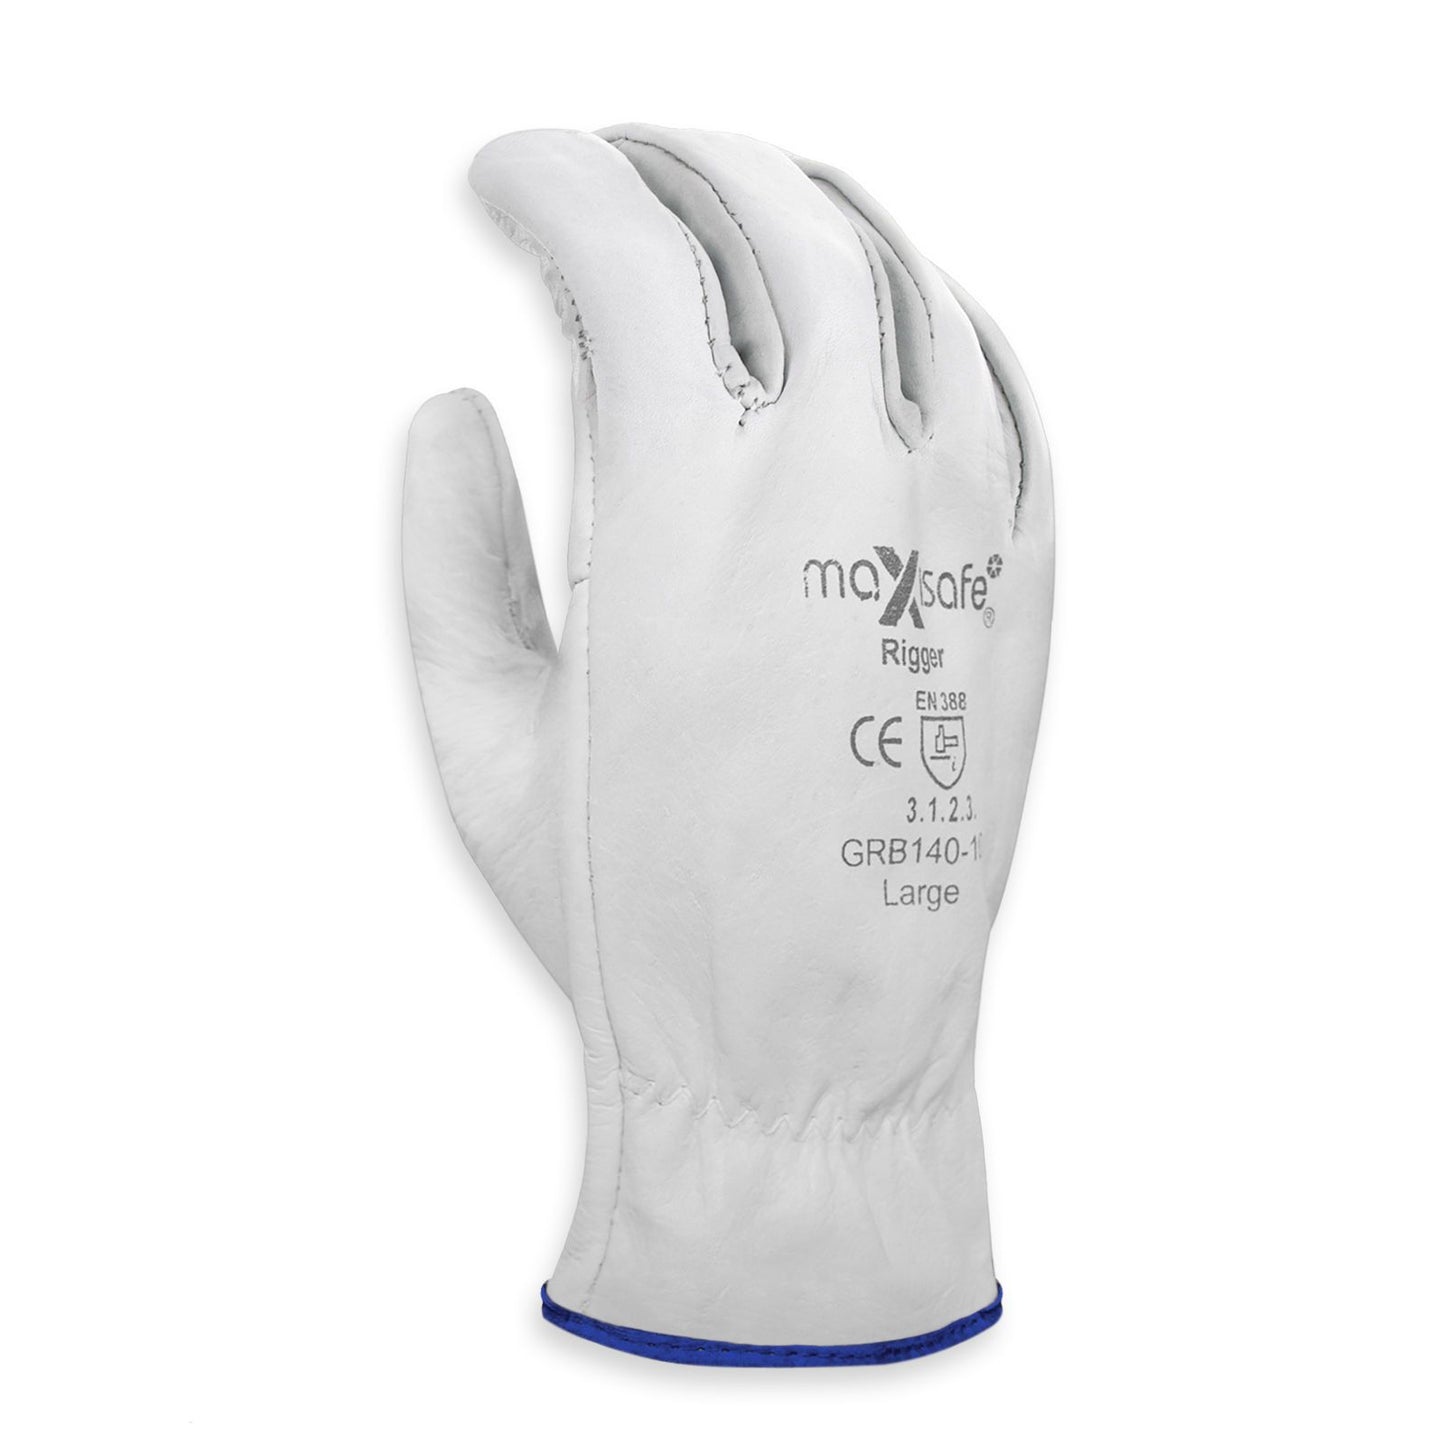 General Purpose Maxisafe Riggers Gloves Premium Cow Grain Leather Soft White